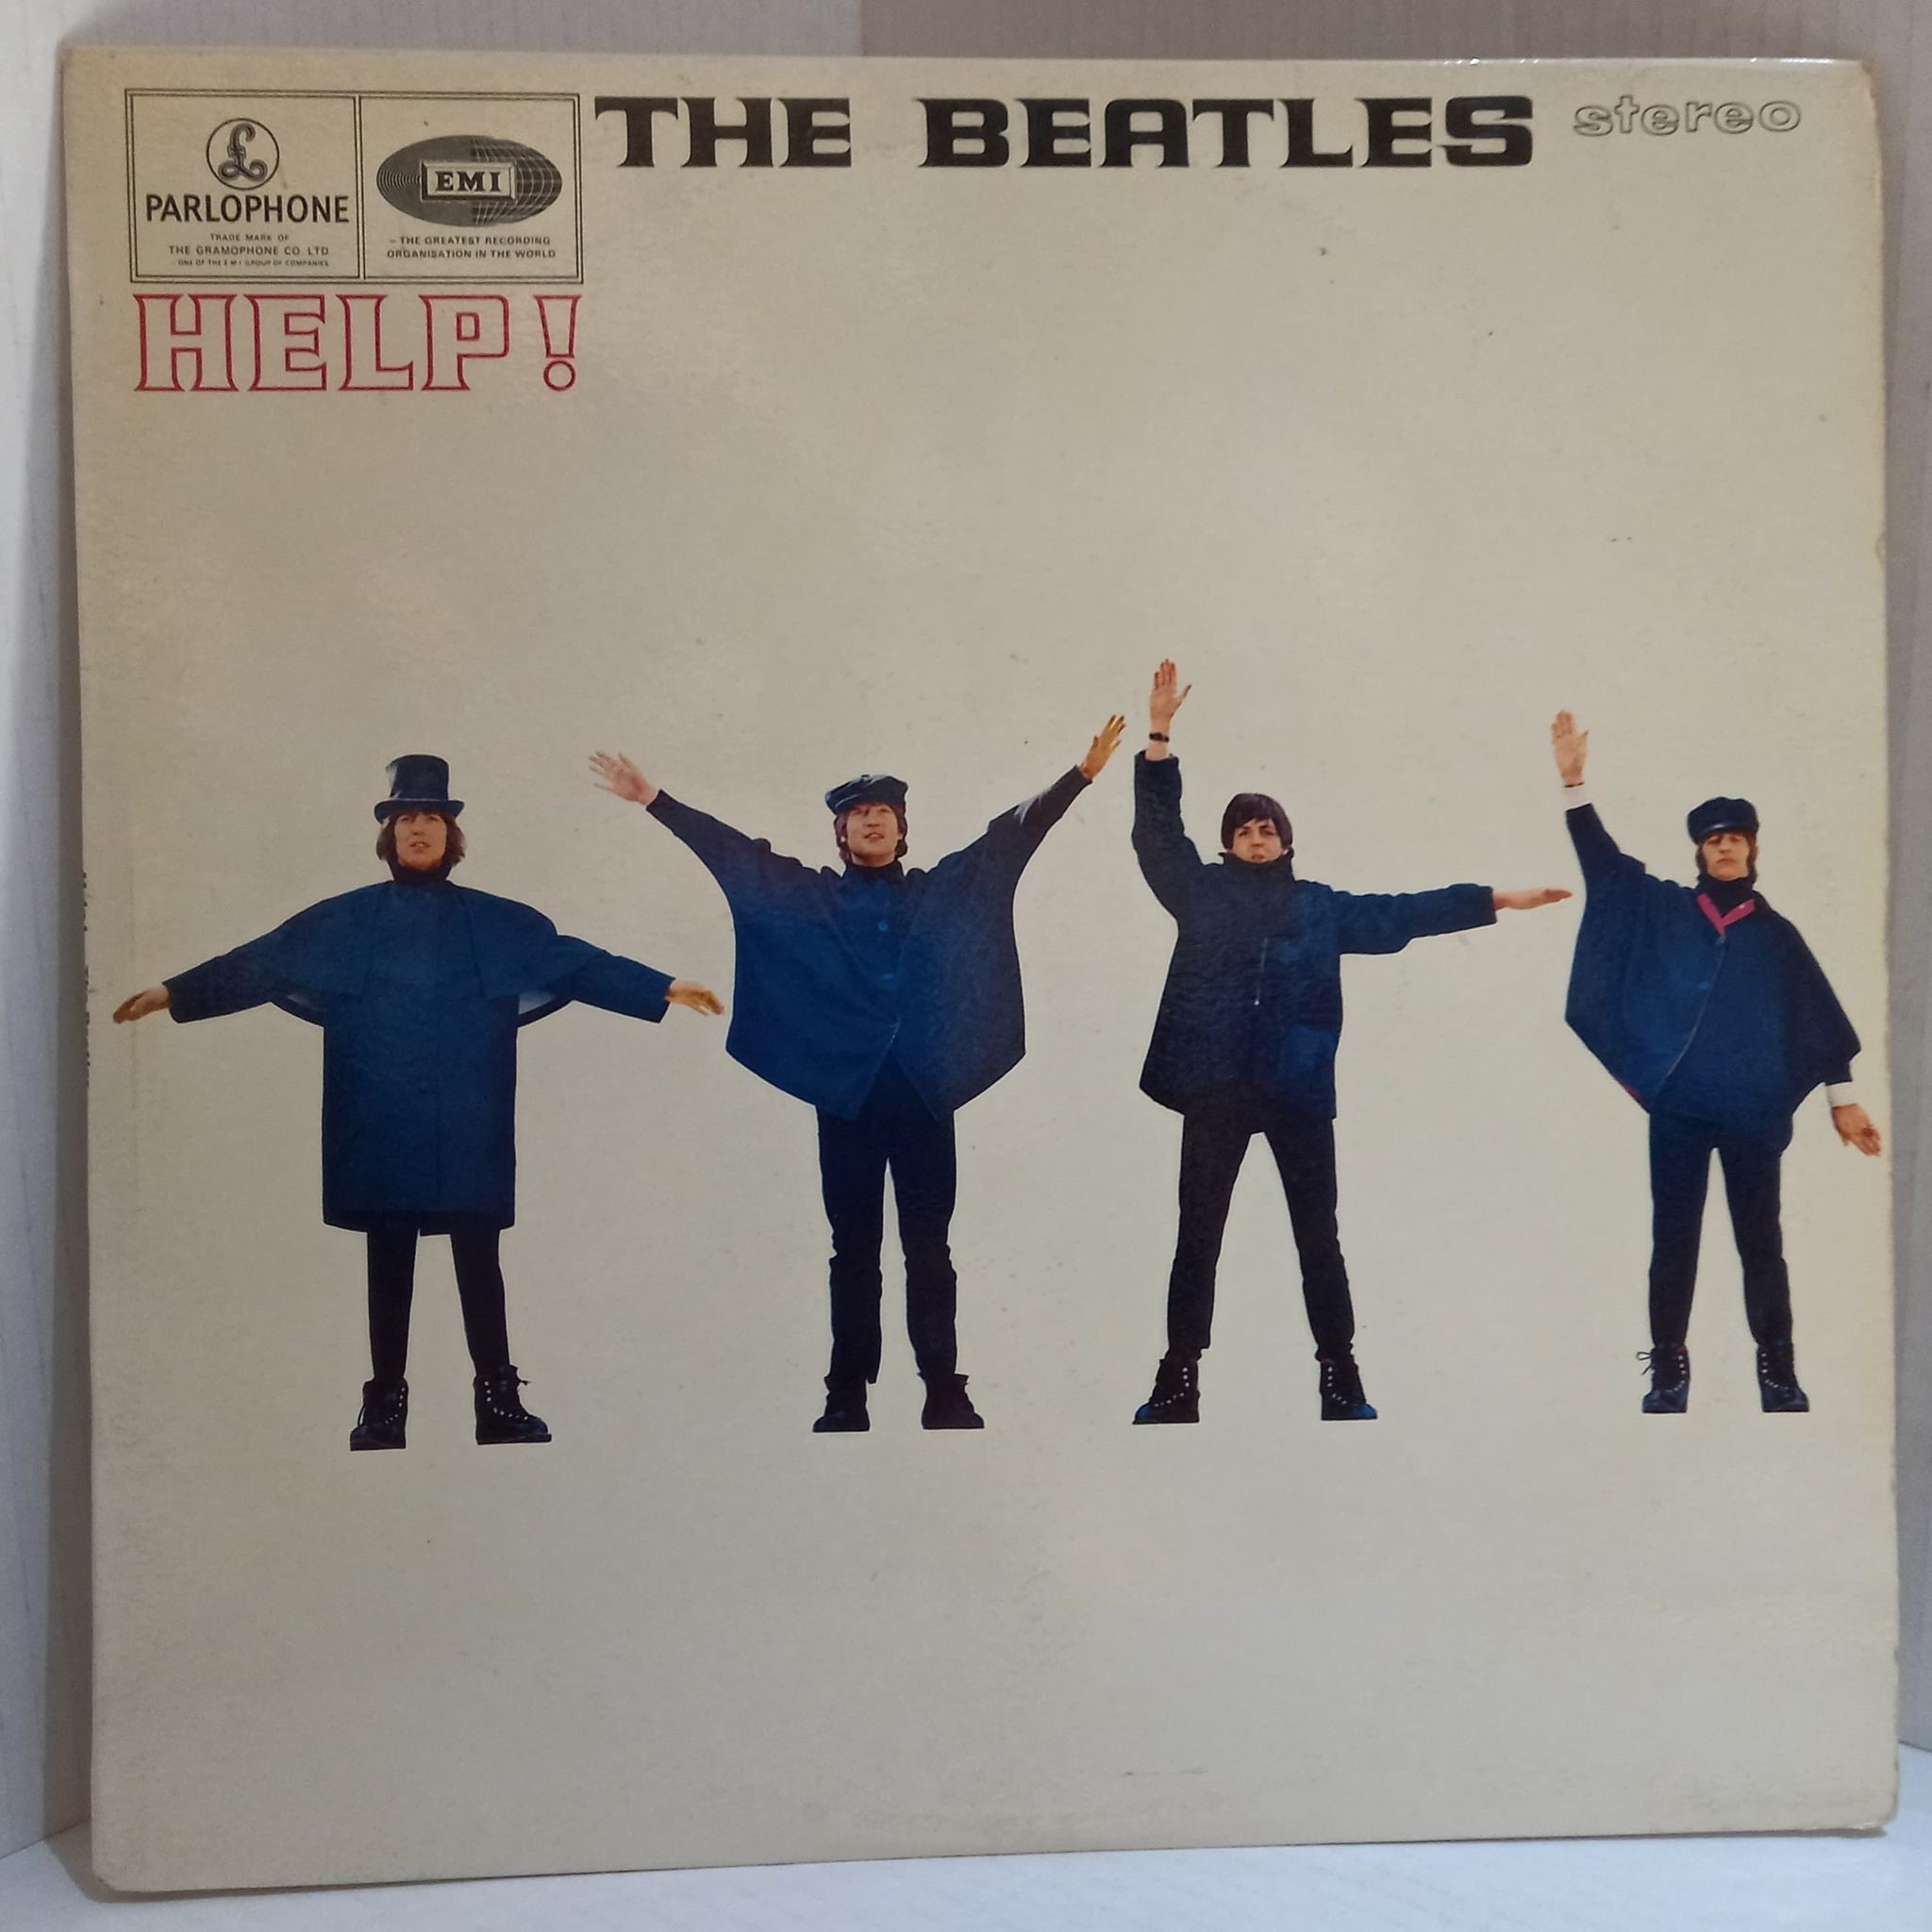 The Beatles HELP! PCS 3071 UK Stereo Black and Yellow Label Parlophone Album excellent condition